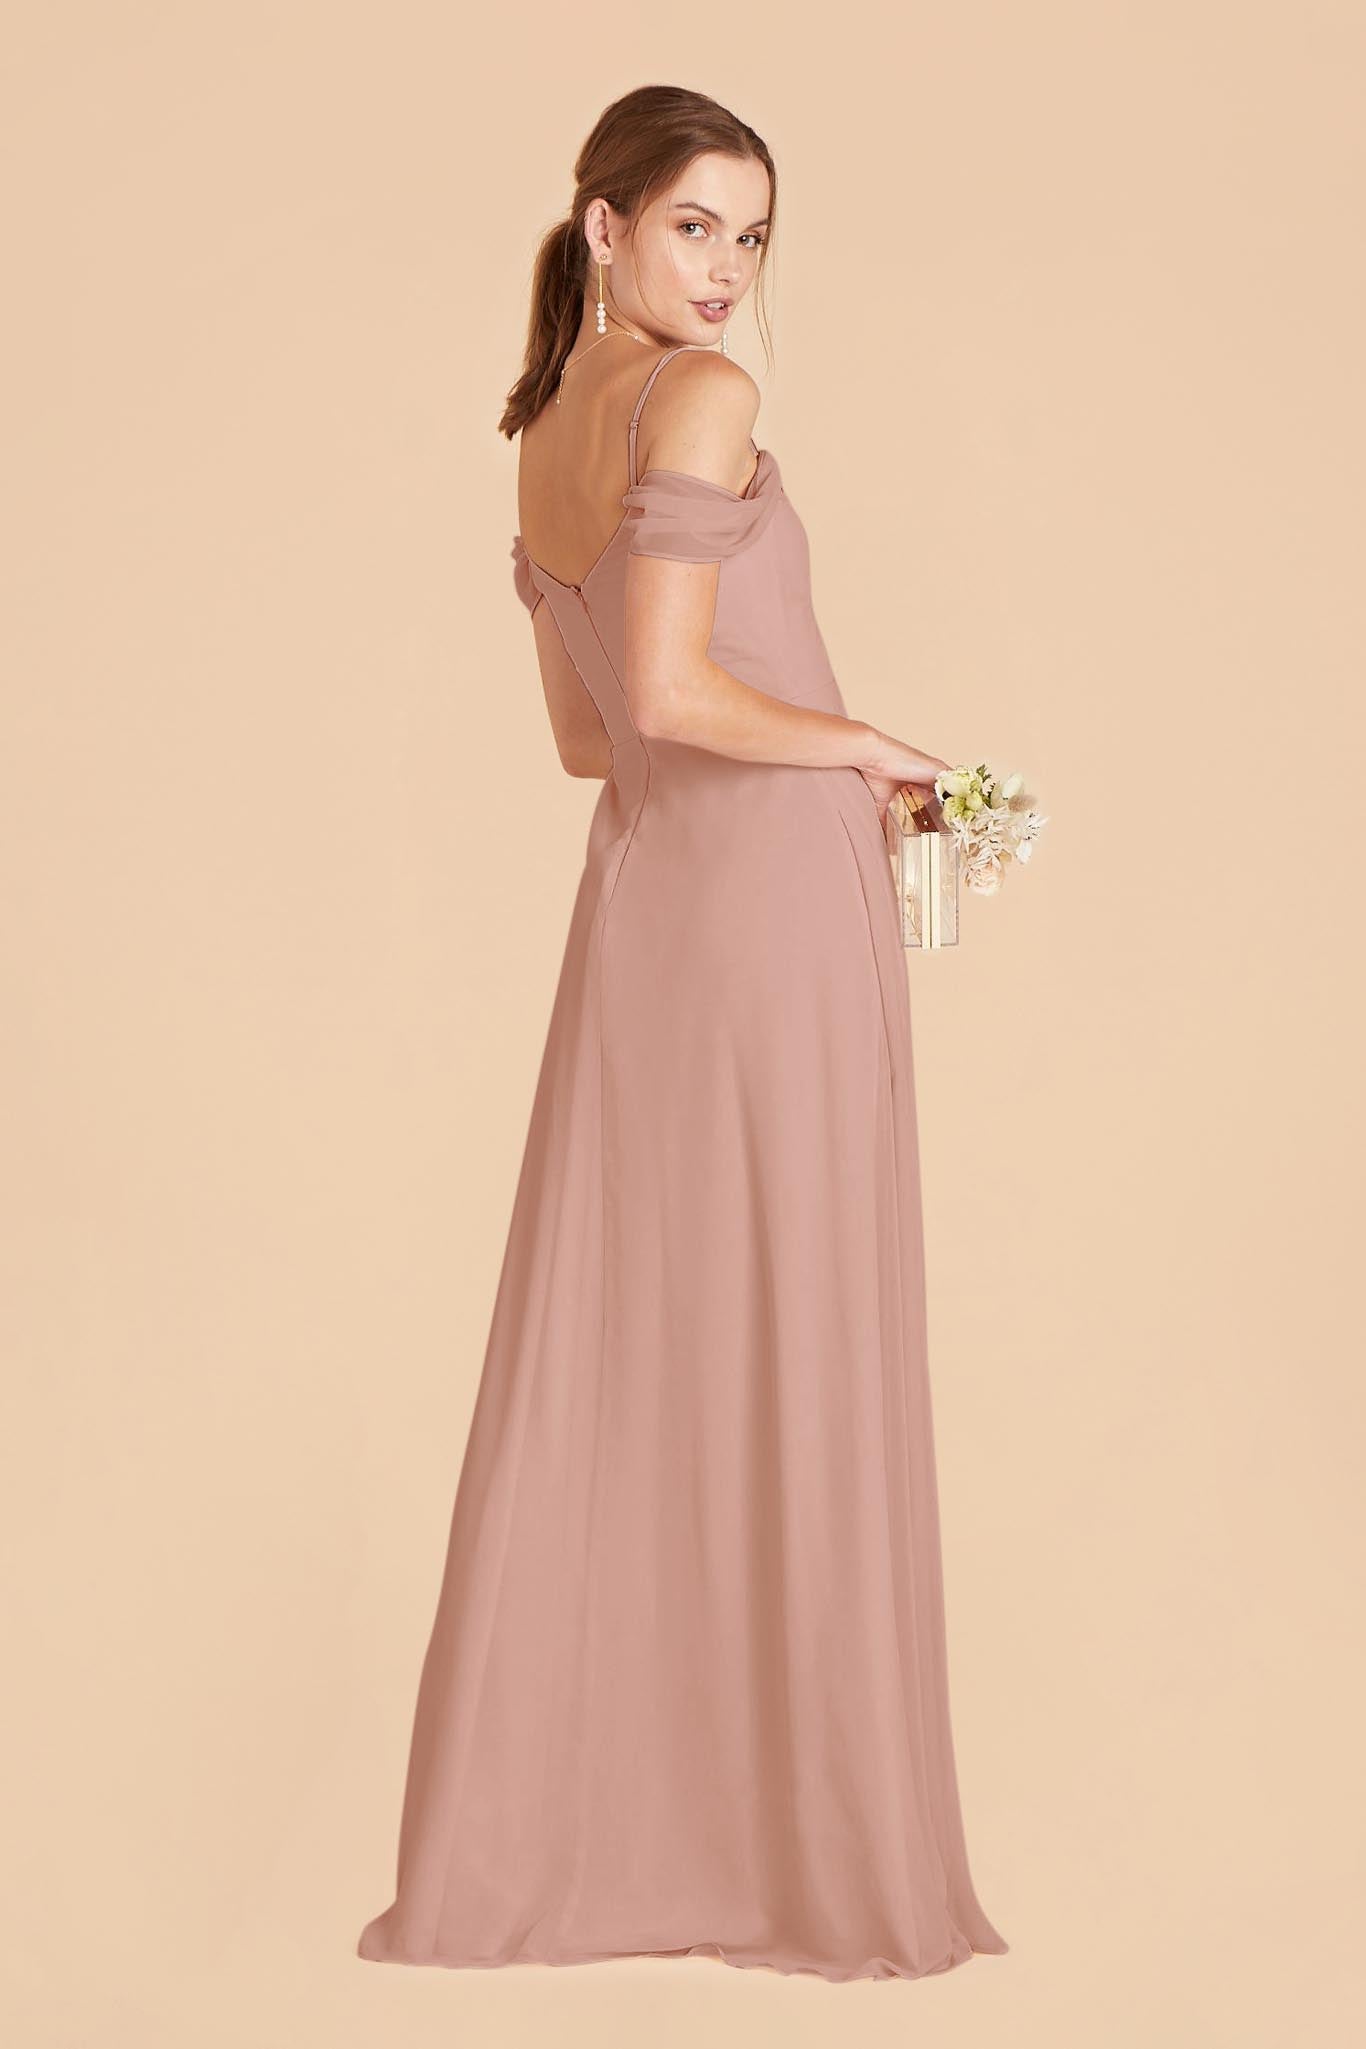 English Rose Spence Convertible Dress by Birdy Grey